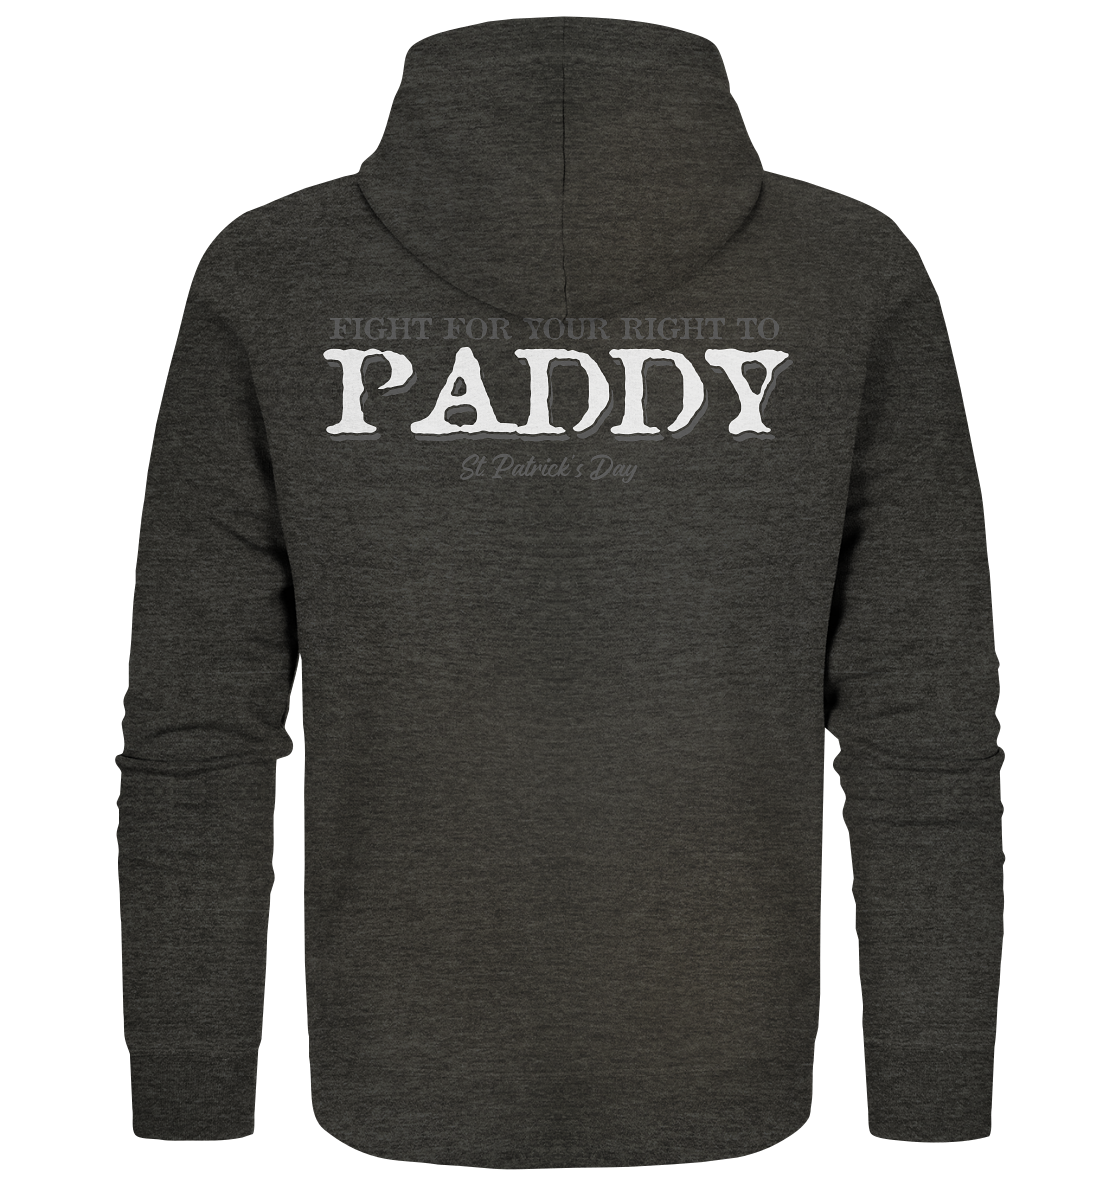 Fight For Your Right To Paddy - Organic Zipper